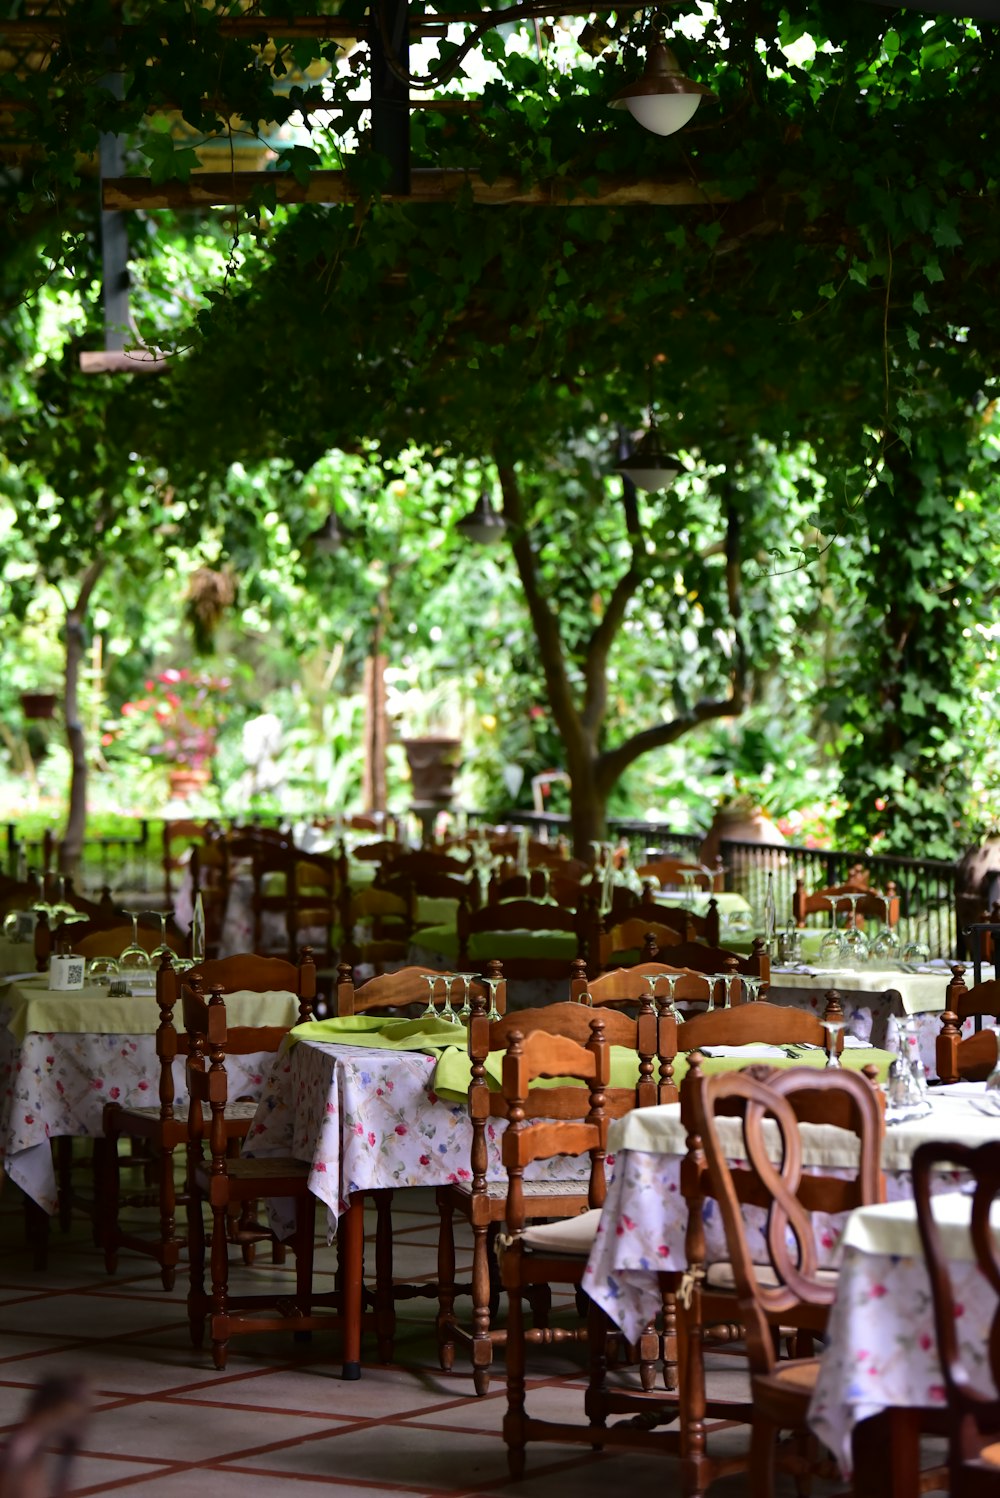 brown wooden chairs and tables near green trees during daytime